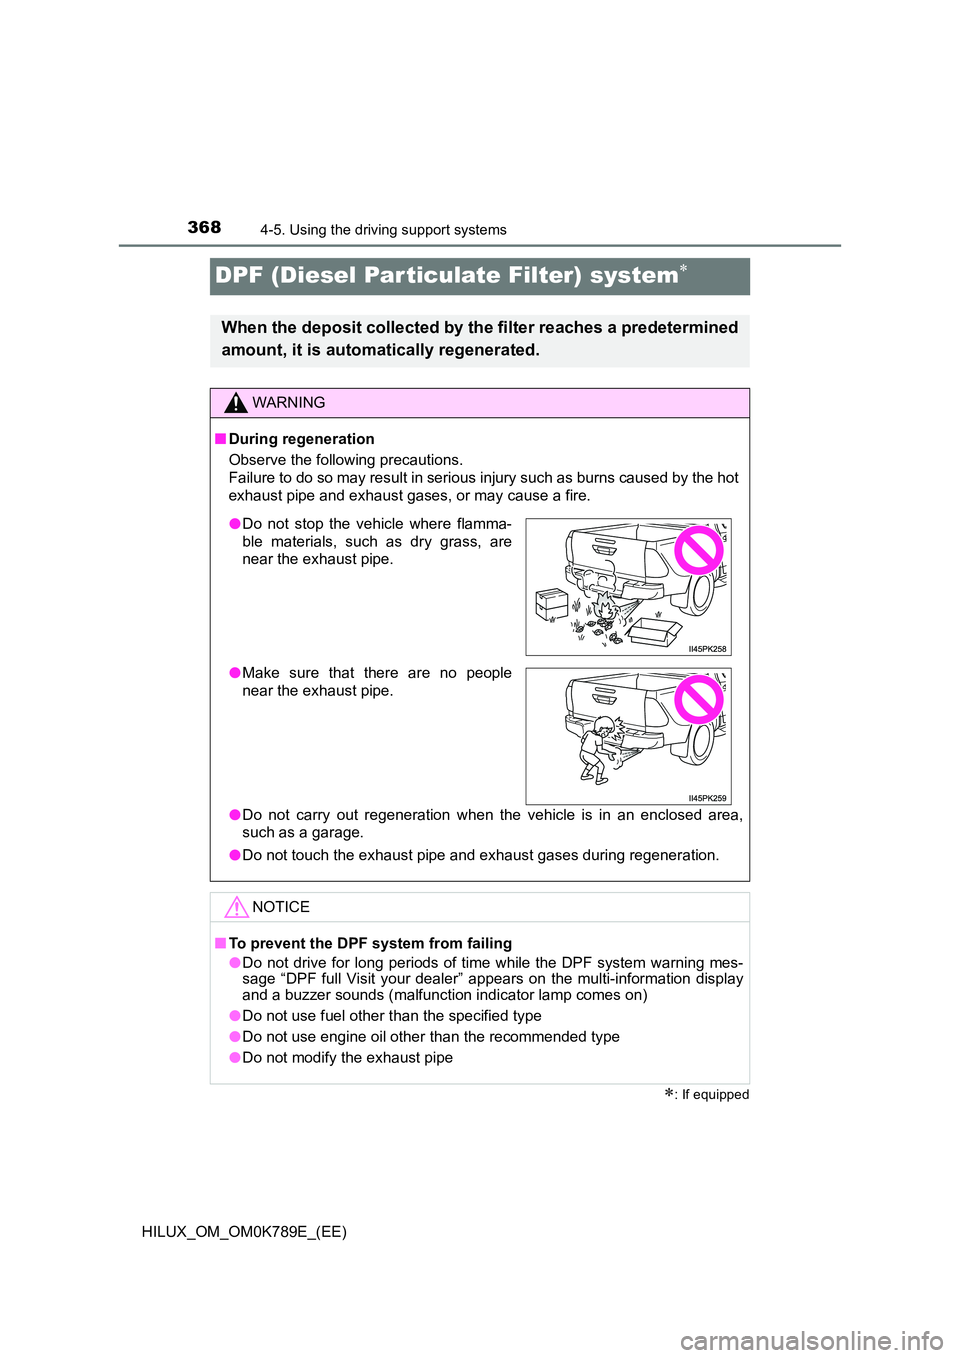 TOYOTA HILUX 2023  Owners Manual 3684-5. Using the driving support systems
HILUX_OM_OM0K789E_(EE)
DPF (Diesel Particulate Filter) system
: If equipped
When the deposit collected by the filter reaches a predetermined 
amount, it